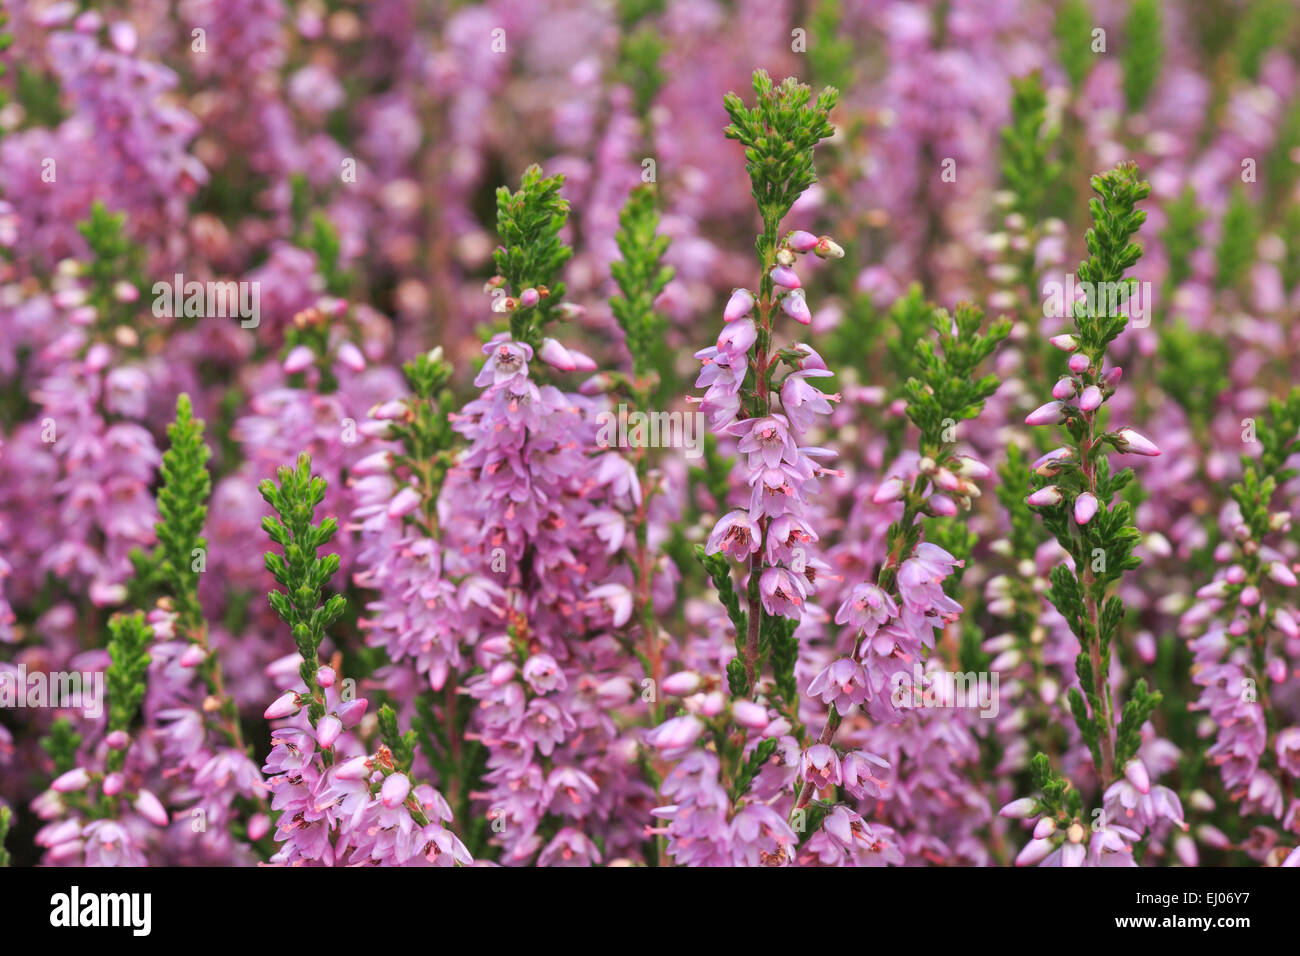 Flower, detail, Erica, Great Britain, Heather, moor, macro, close-up, Scotland, Europe, blossom, blossoming, green, mauve, pink, Stock Photo